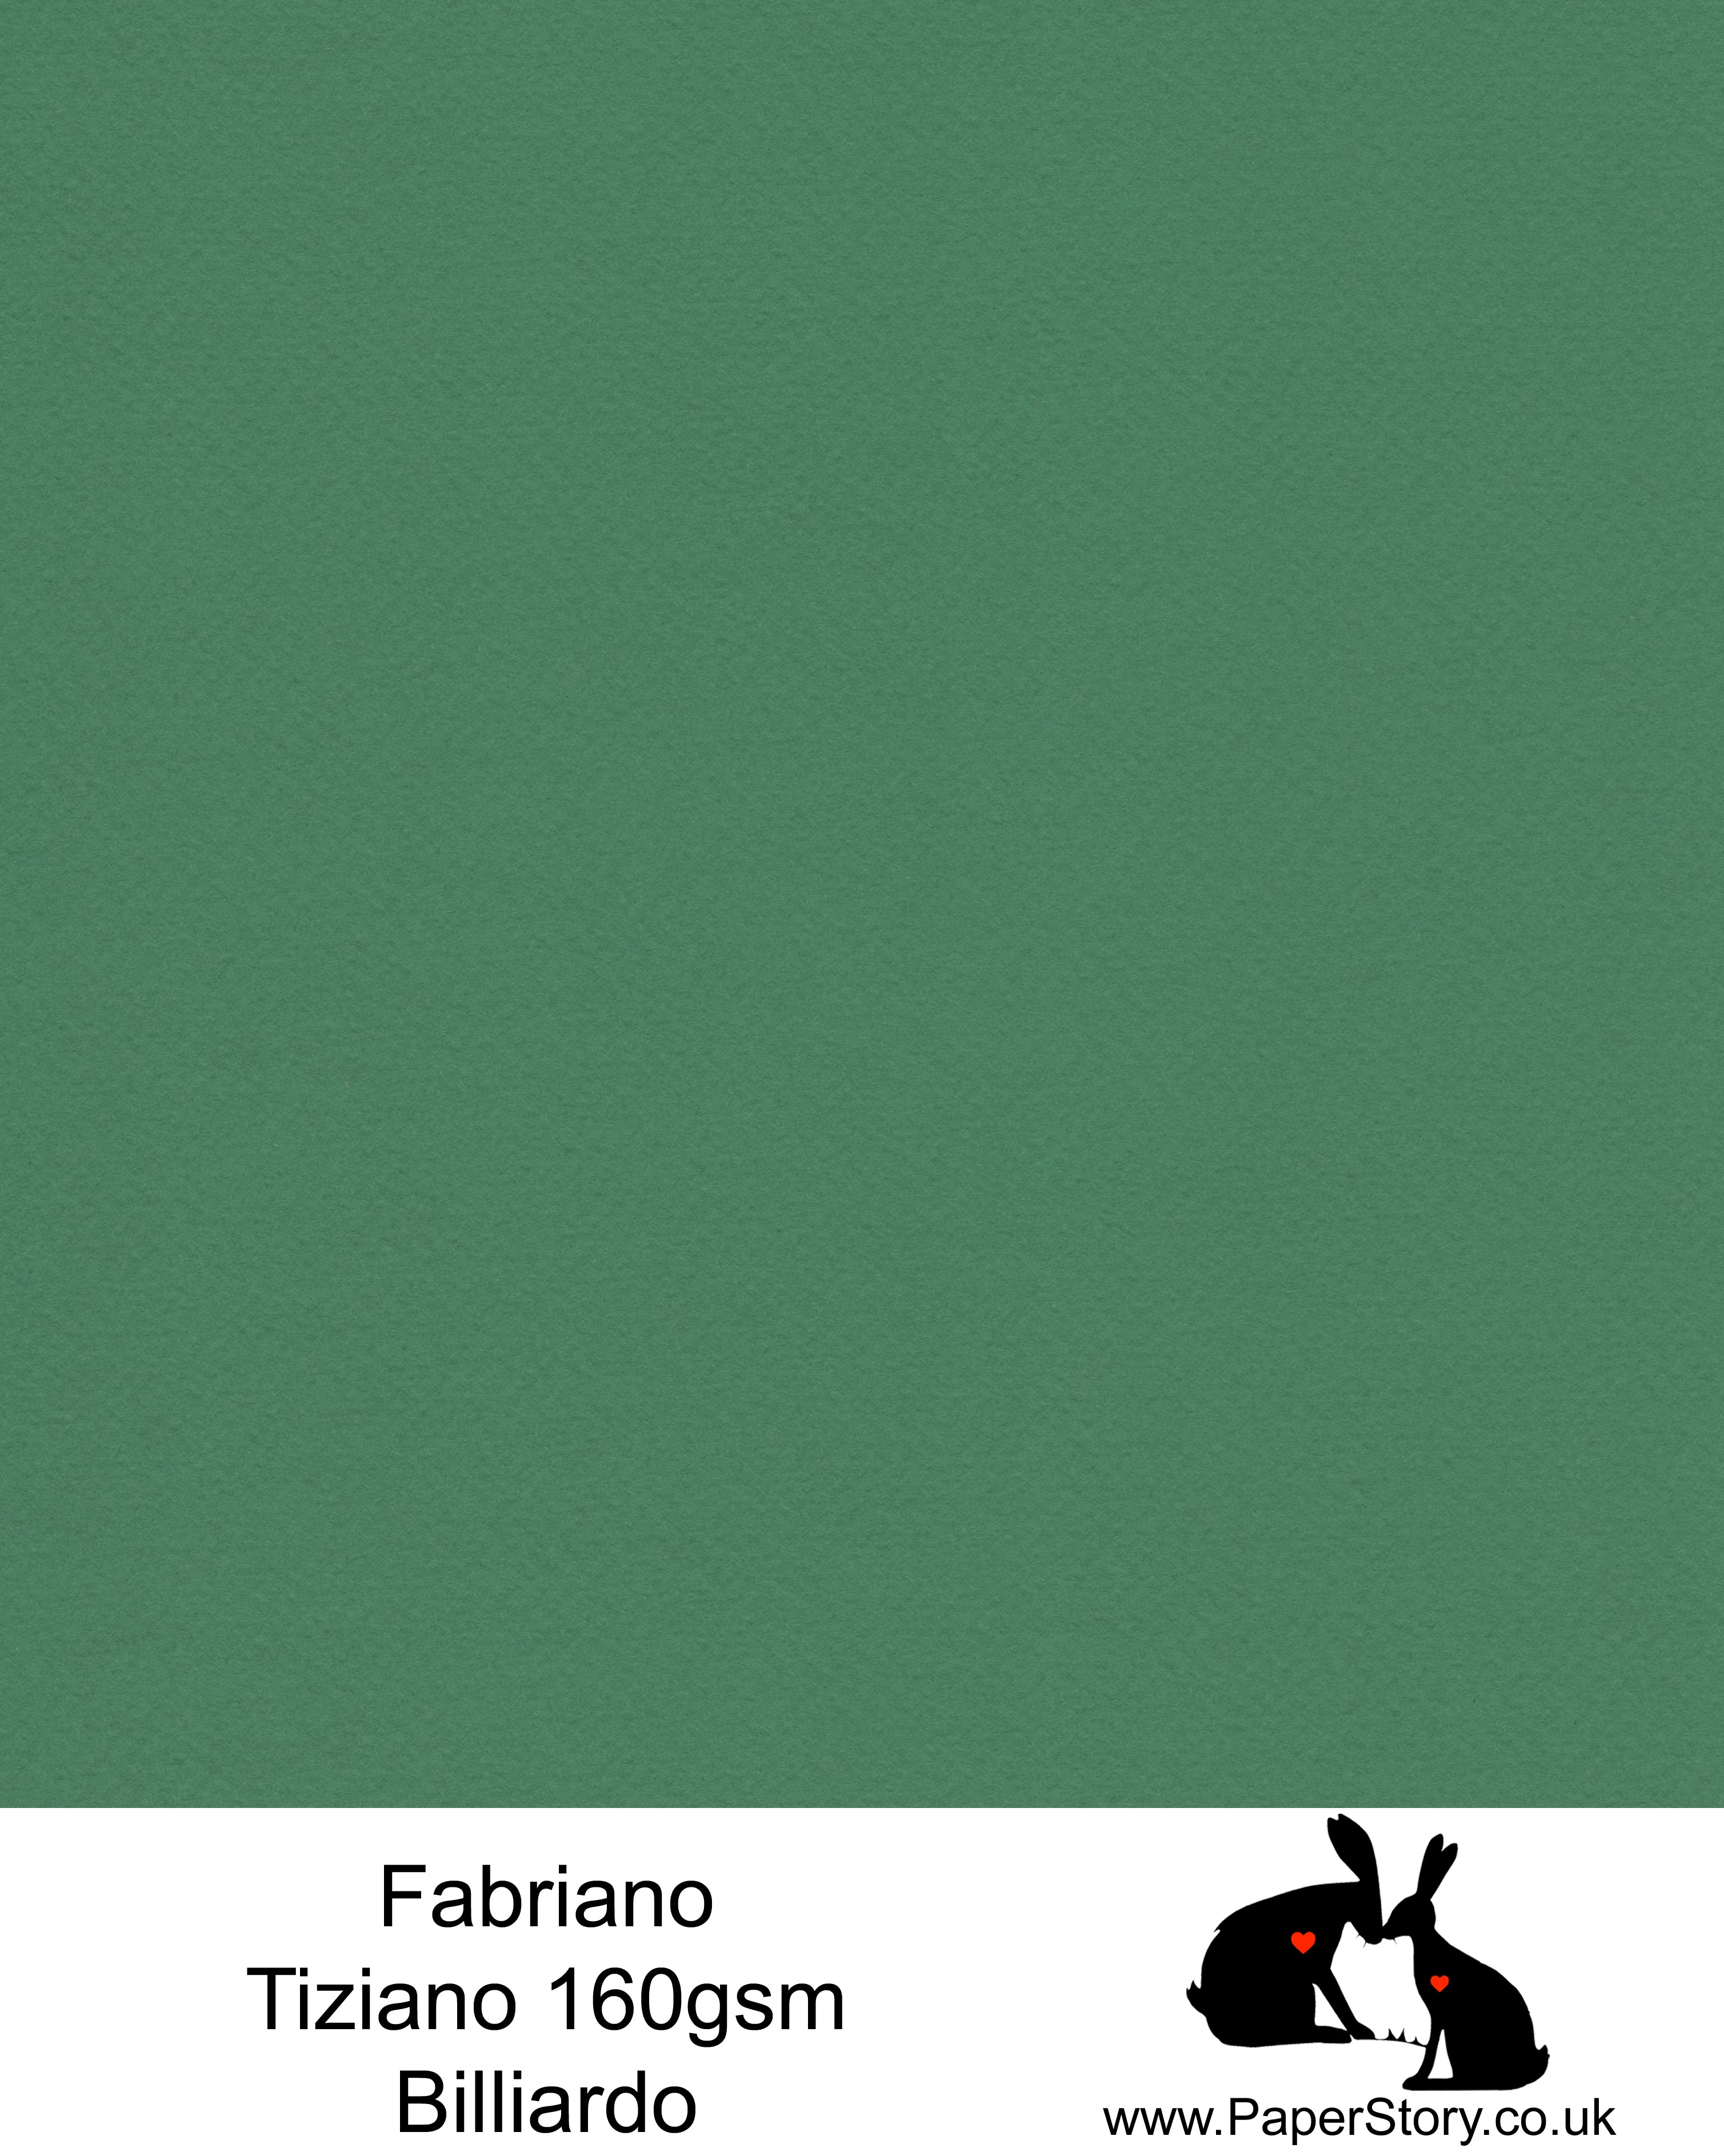 High quality paper from Italy, Billiardo forest green Fabriano Tiziano is 160 gsm, Tiziano has a high cotton content, a textured naturally sized surface. This paper is acid free to guarantee long permanence in time, pH neutral. It has highly lightfast colours, an excellent surface making and sizing which make this paper particularly suitable for papercutting, pastels, pencil, graphite, charcoal, tempera, air brush and watercolour techniques. Tiziano can be used for all printing techniques.